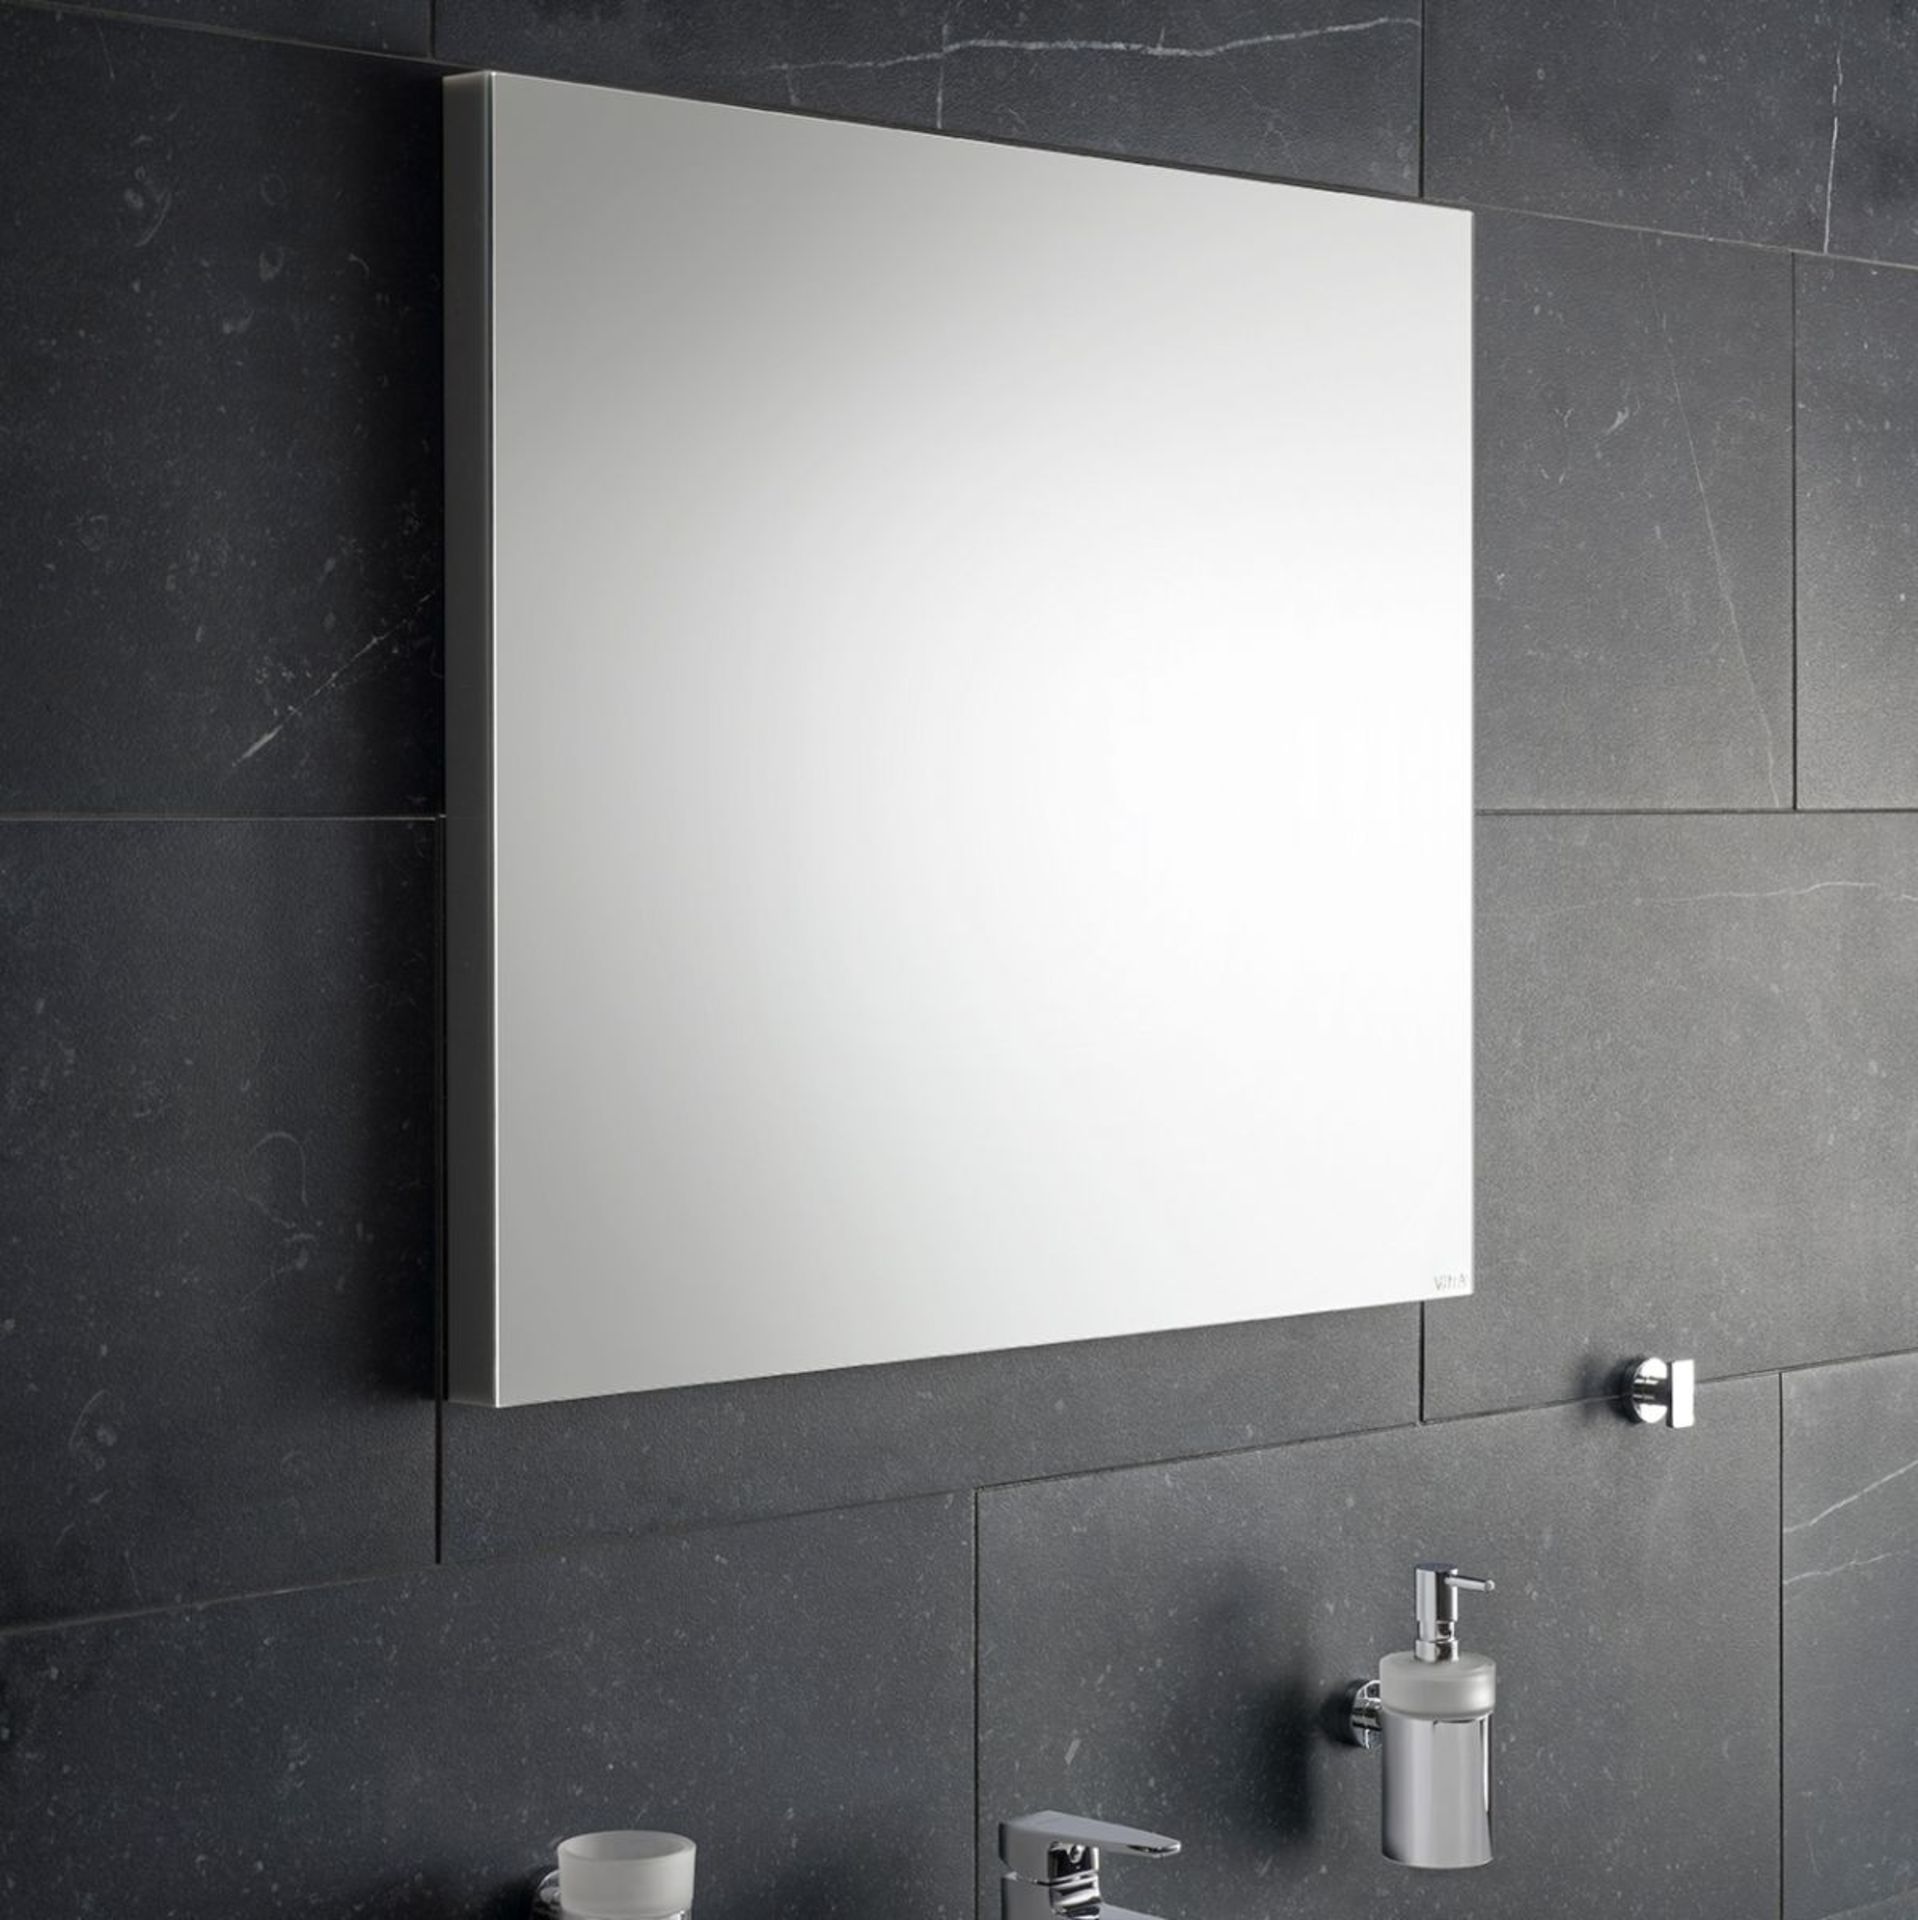 1 x VitrA Brite Illuminated 80cm Bathroom Mirror With On/Off Touch Control - New - RRP £230 - Image 2 of 3